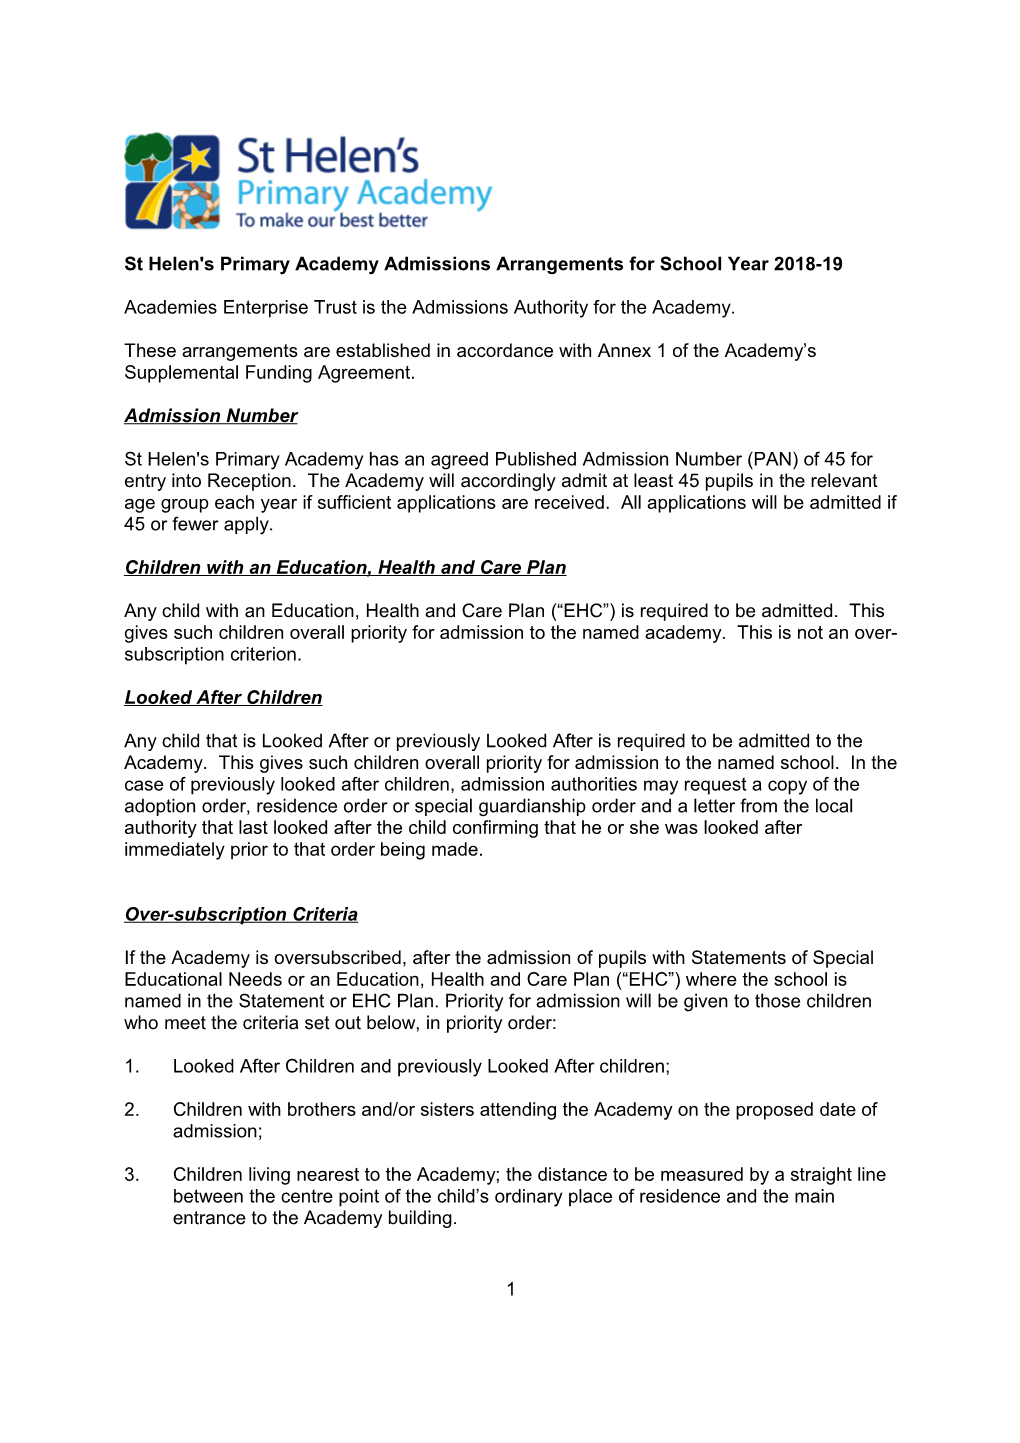 St Helen's Primary Academy Admissions Arrangements for School Year 2018-19